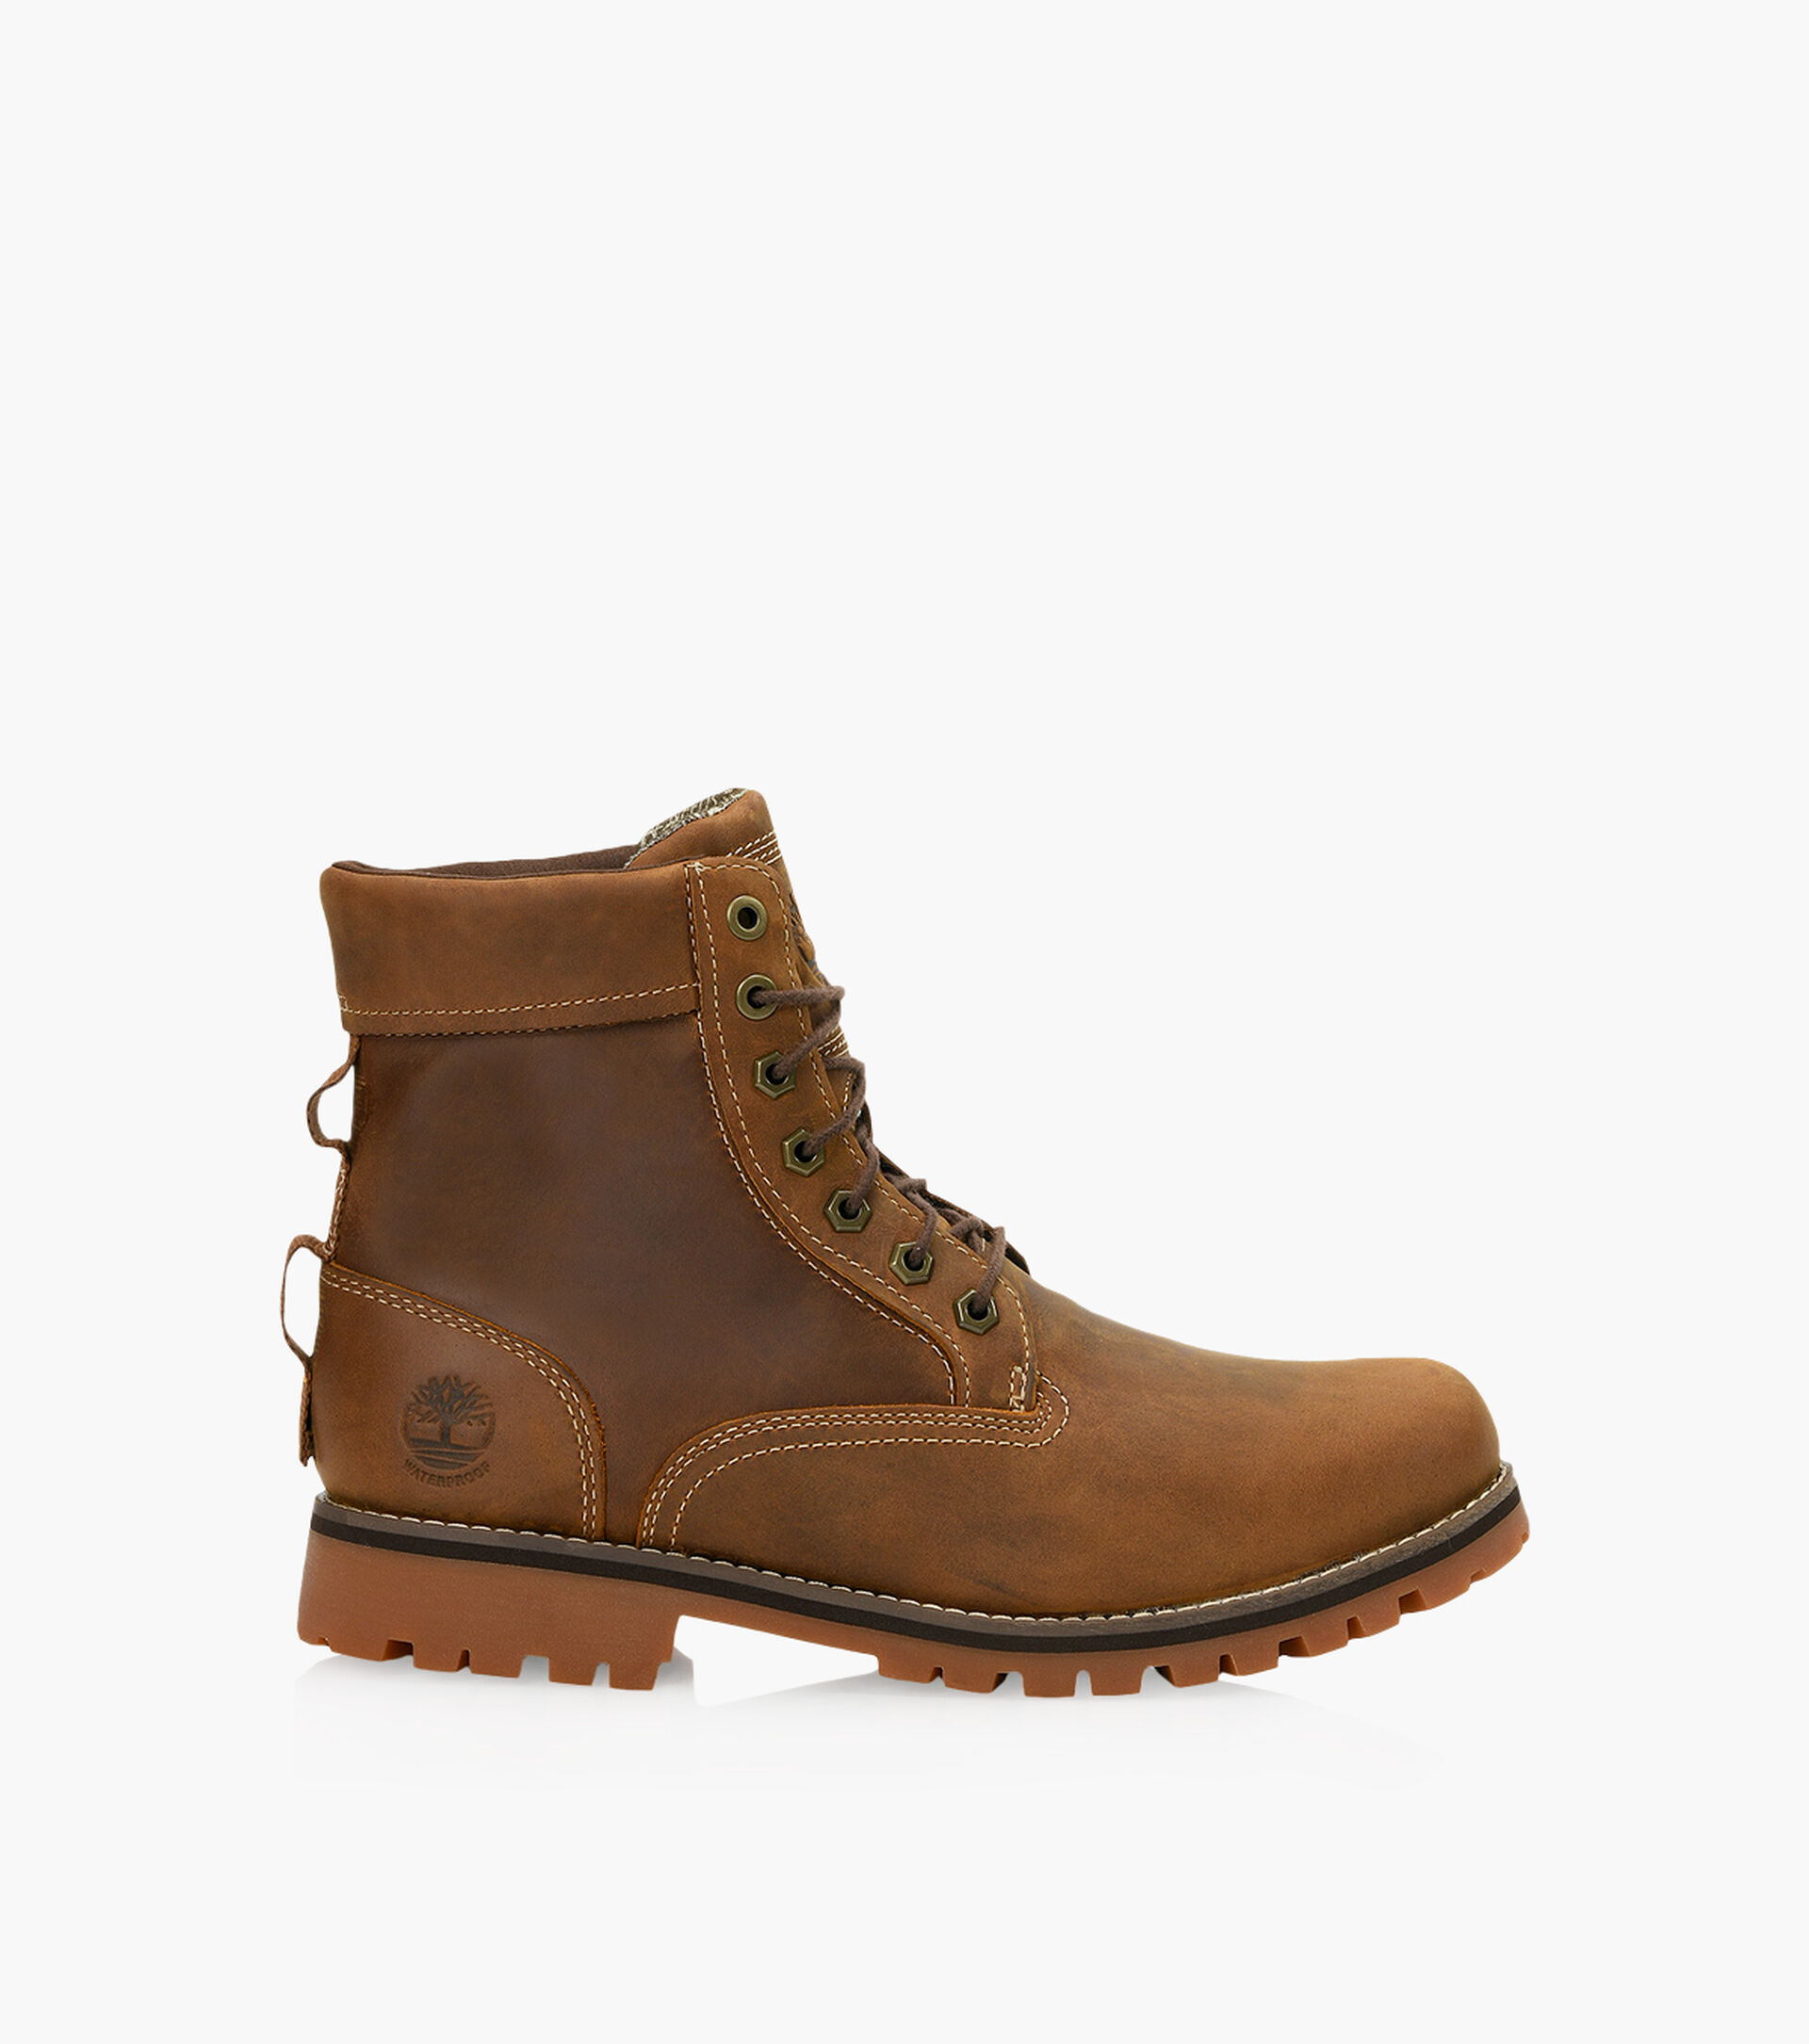 TIMBERLAND RUGGED 6-INCH WATERPROOF BOOTS II - Leather | Browns Shoes